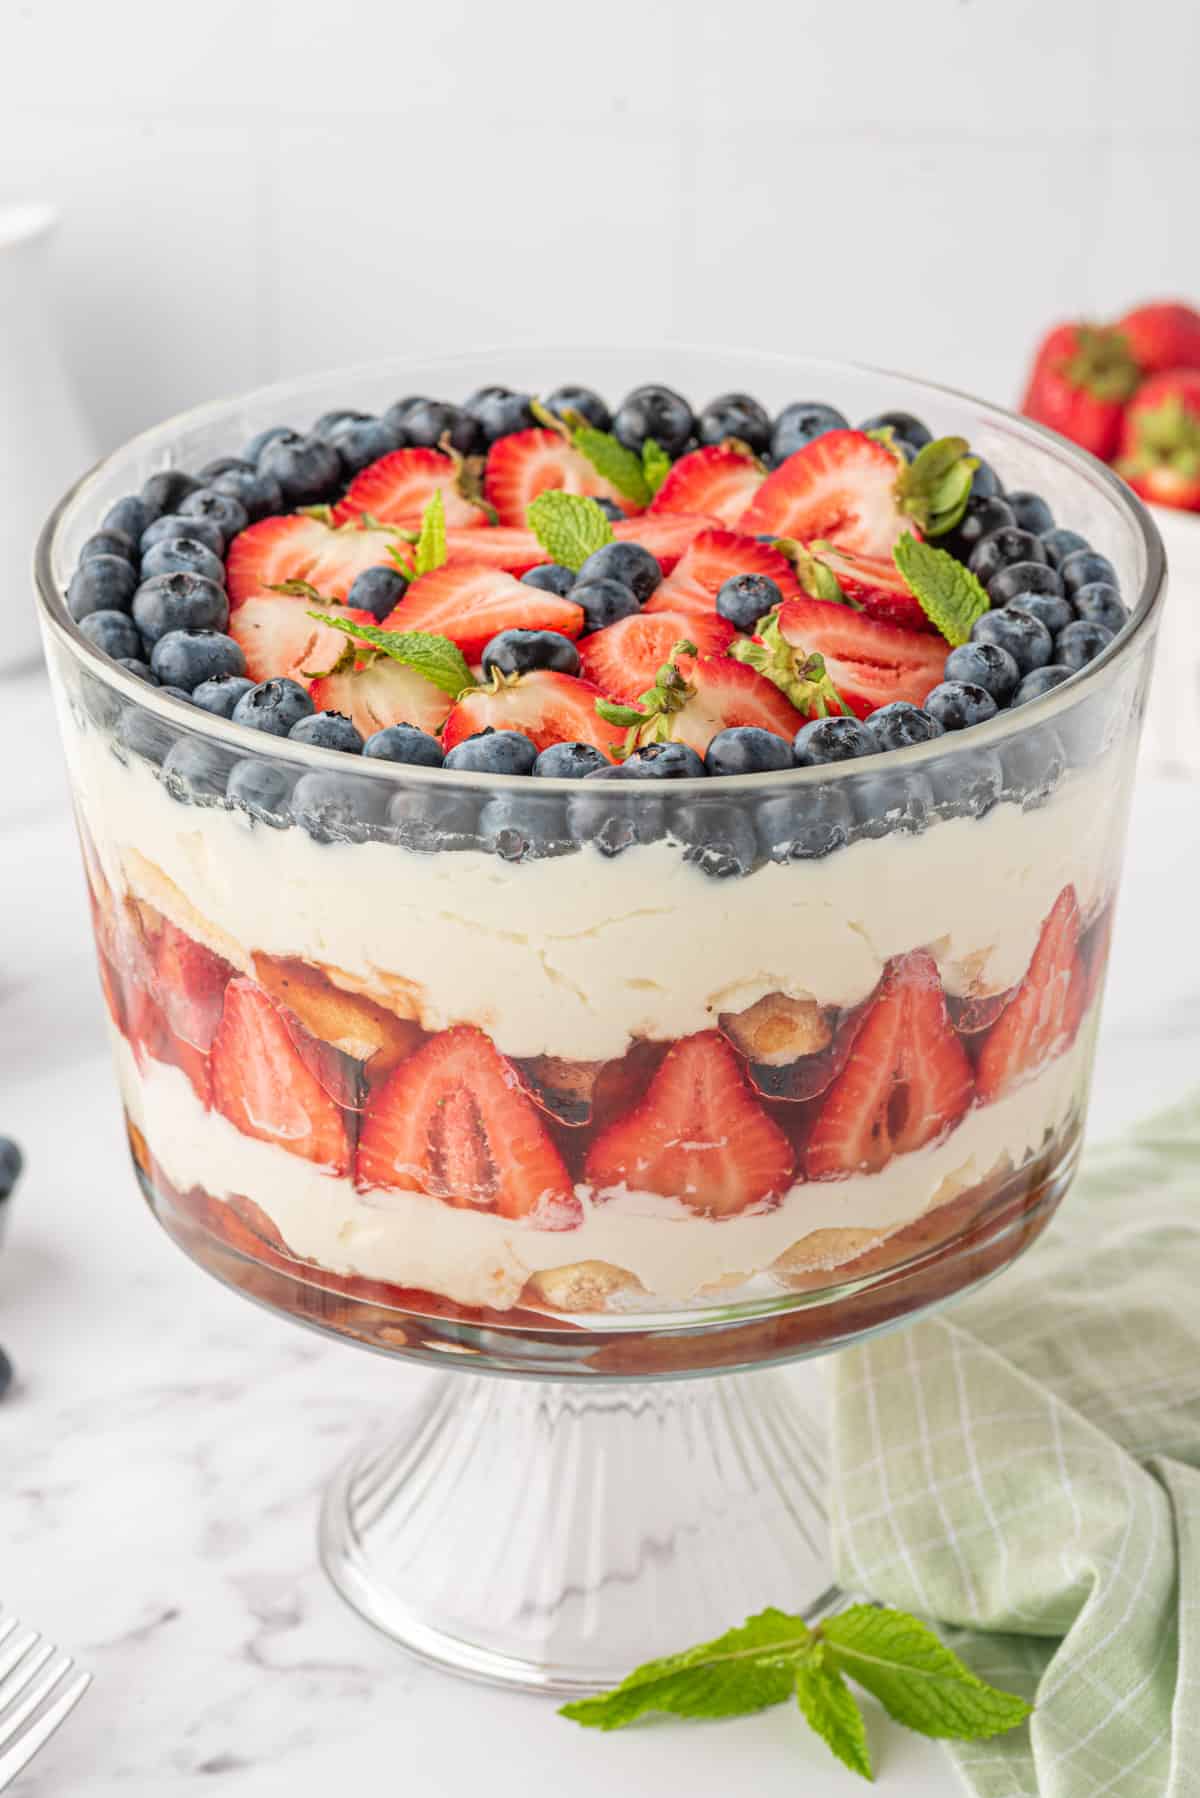 A layered strawberry and blueberry tiramusi is presented in a glass trifle dish.